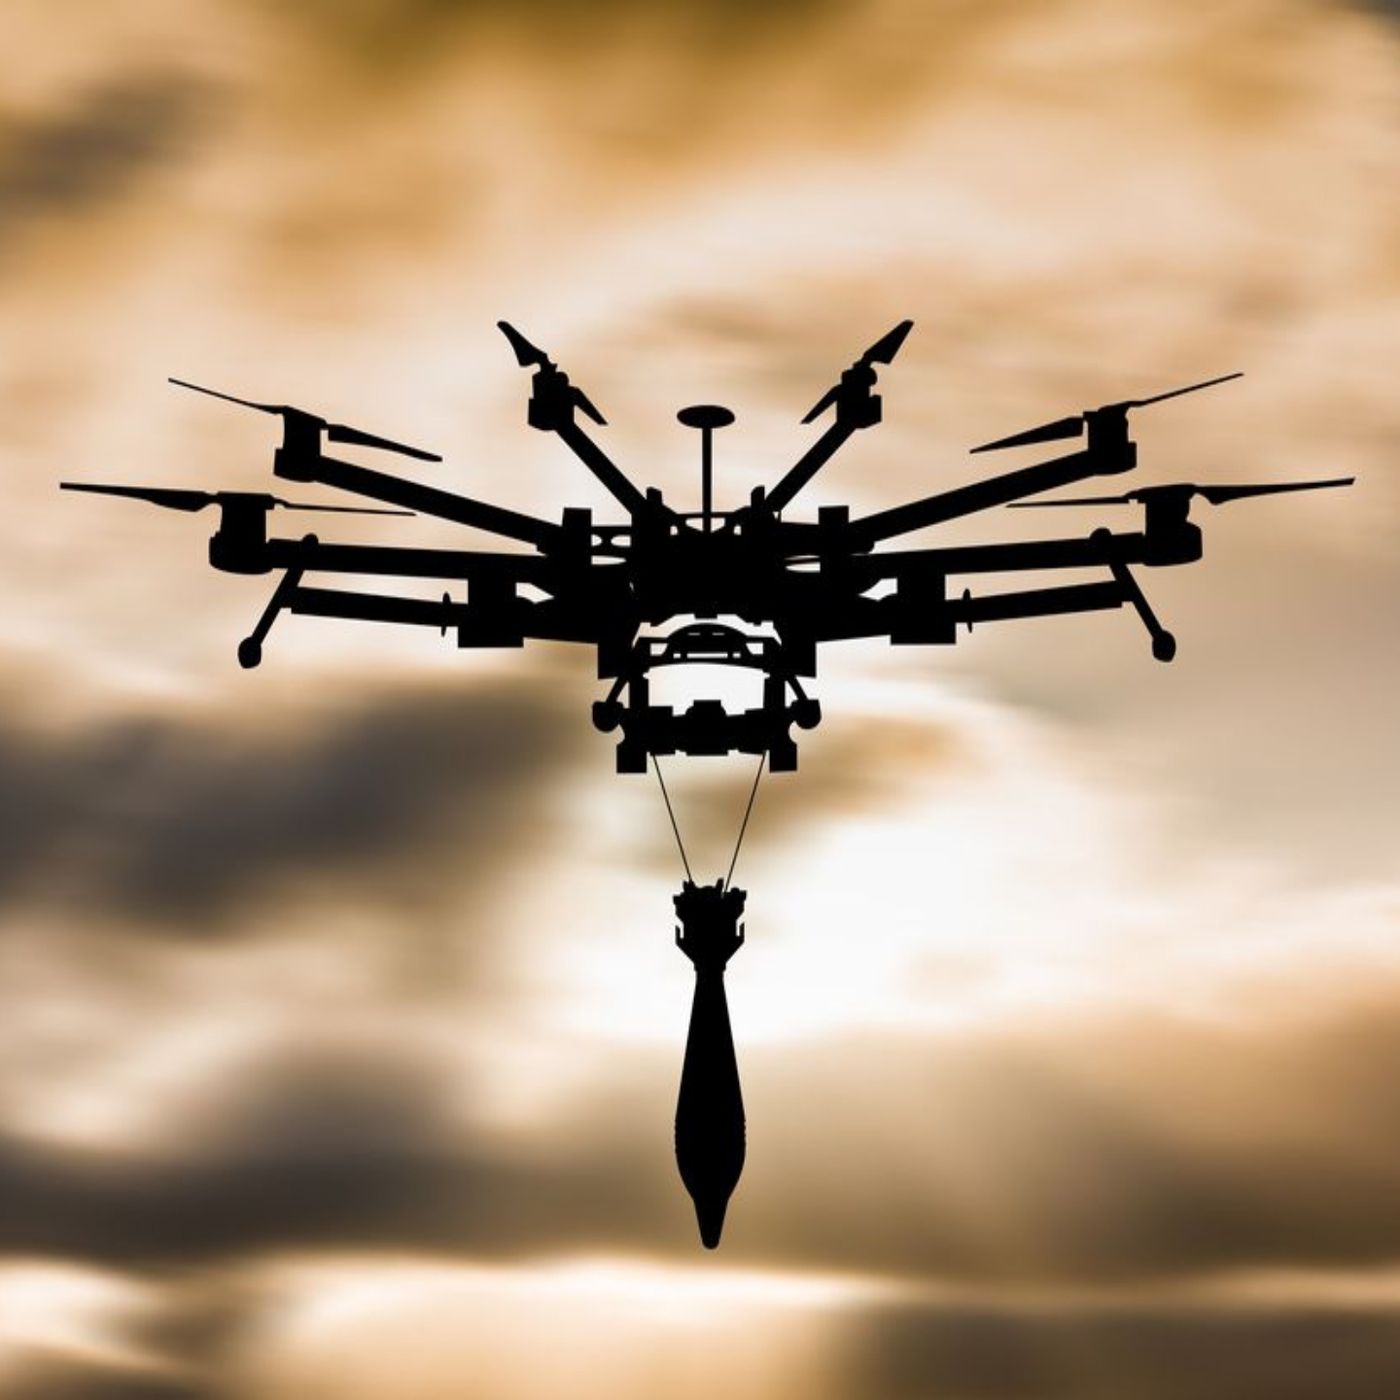 The good and evil about drones